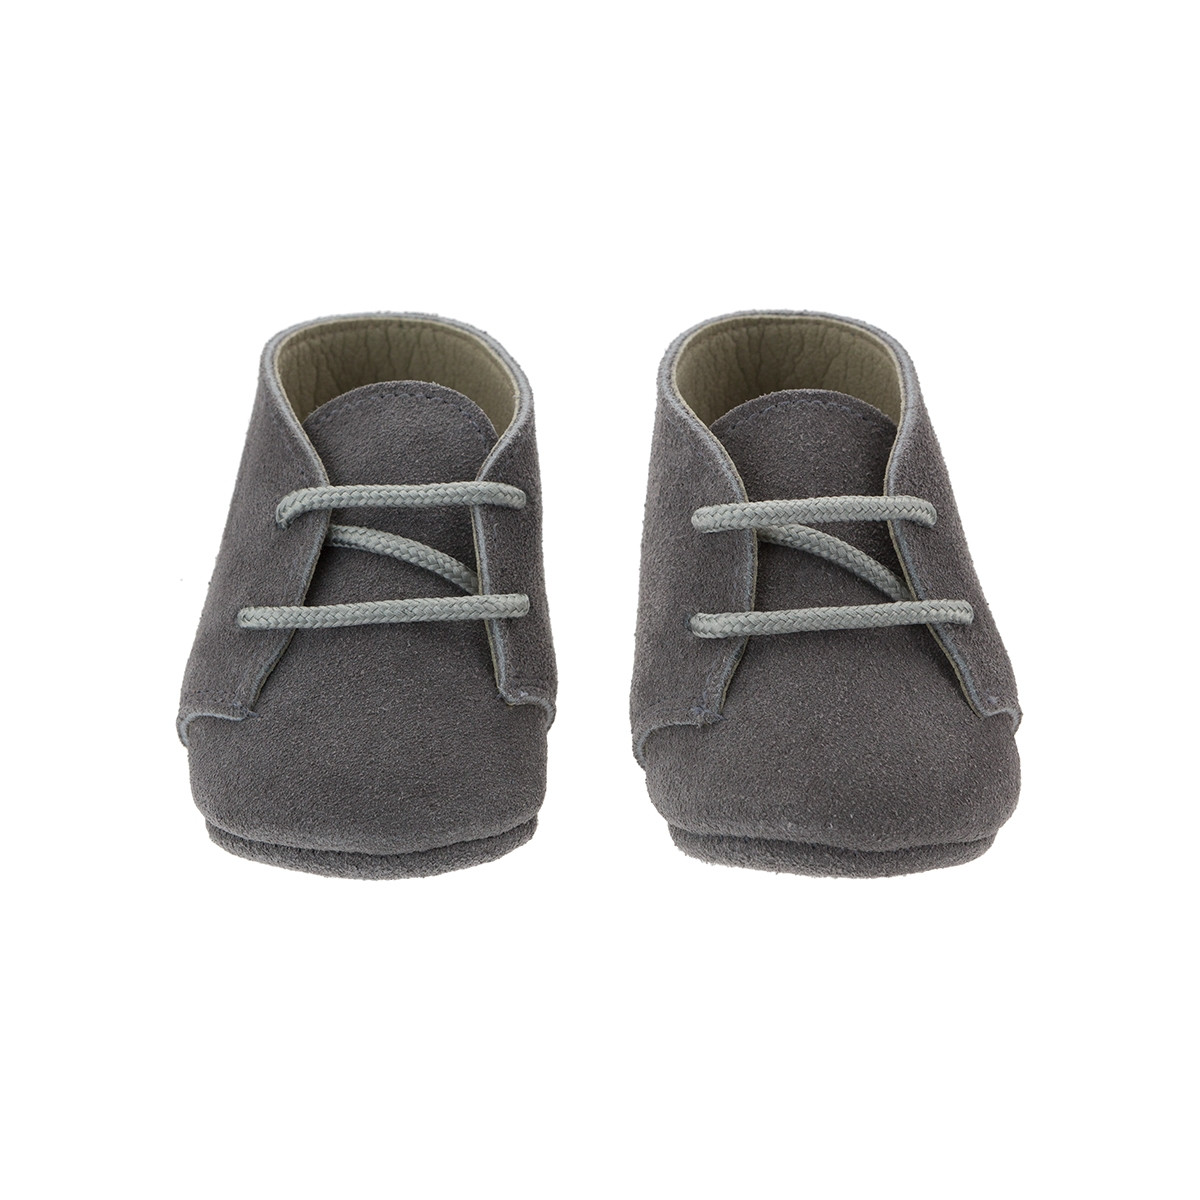 WINTER BABY SHOES MOD.605 GREY CAMBRASS - 2